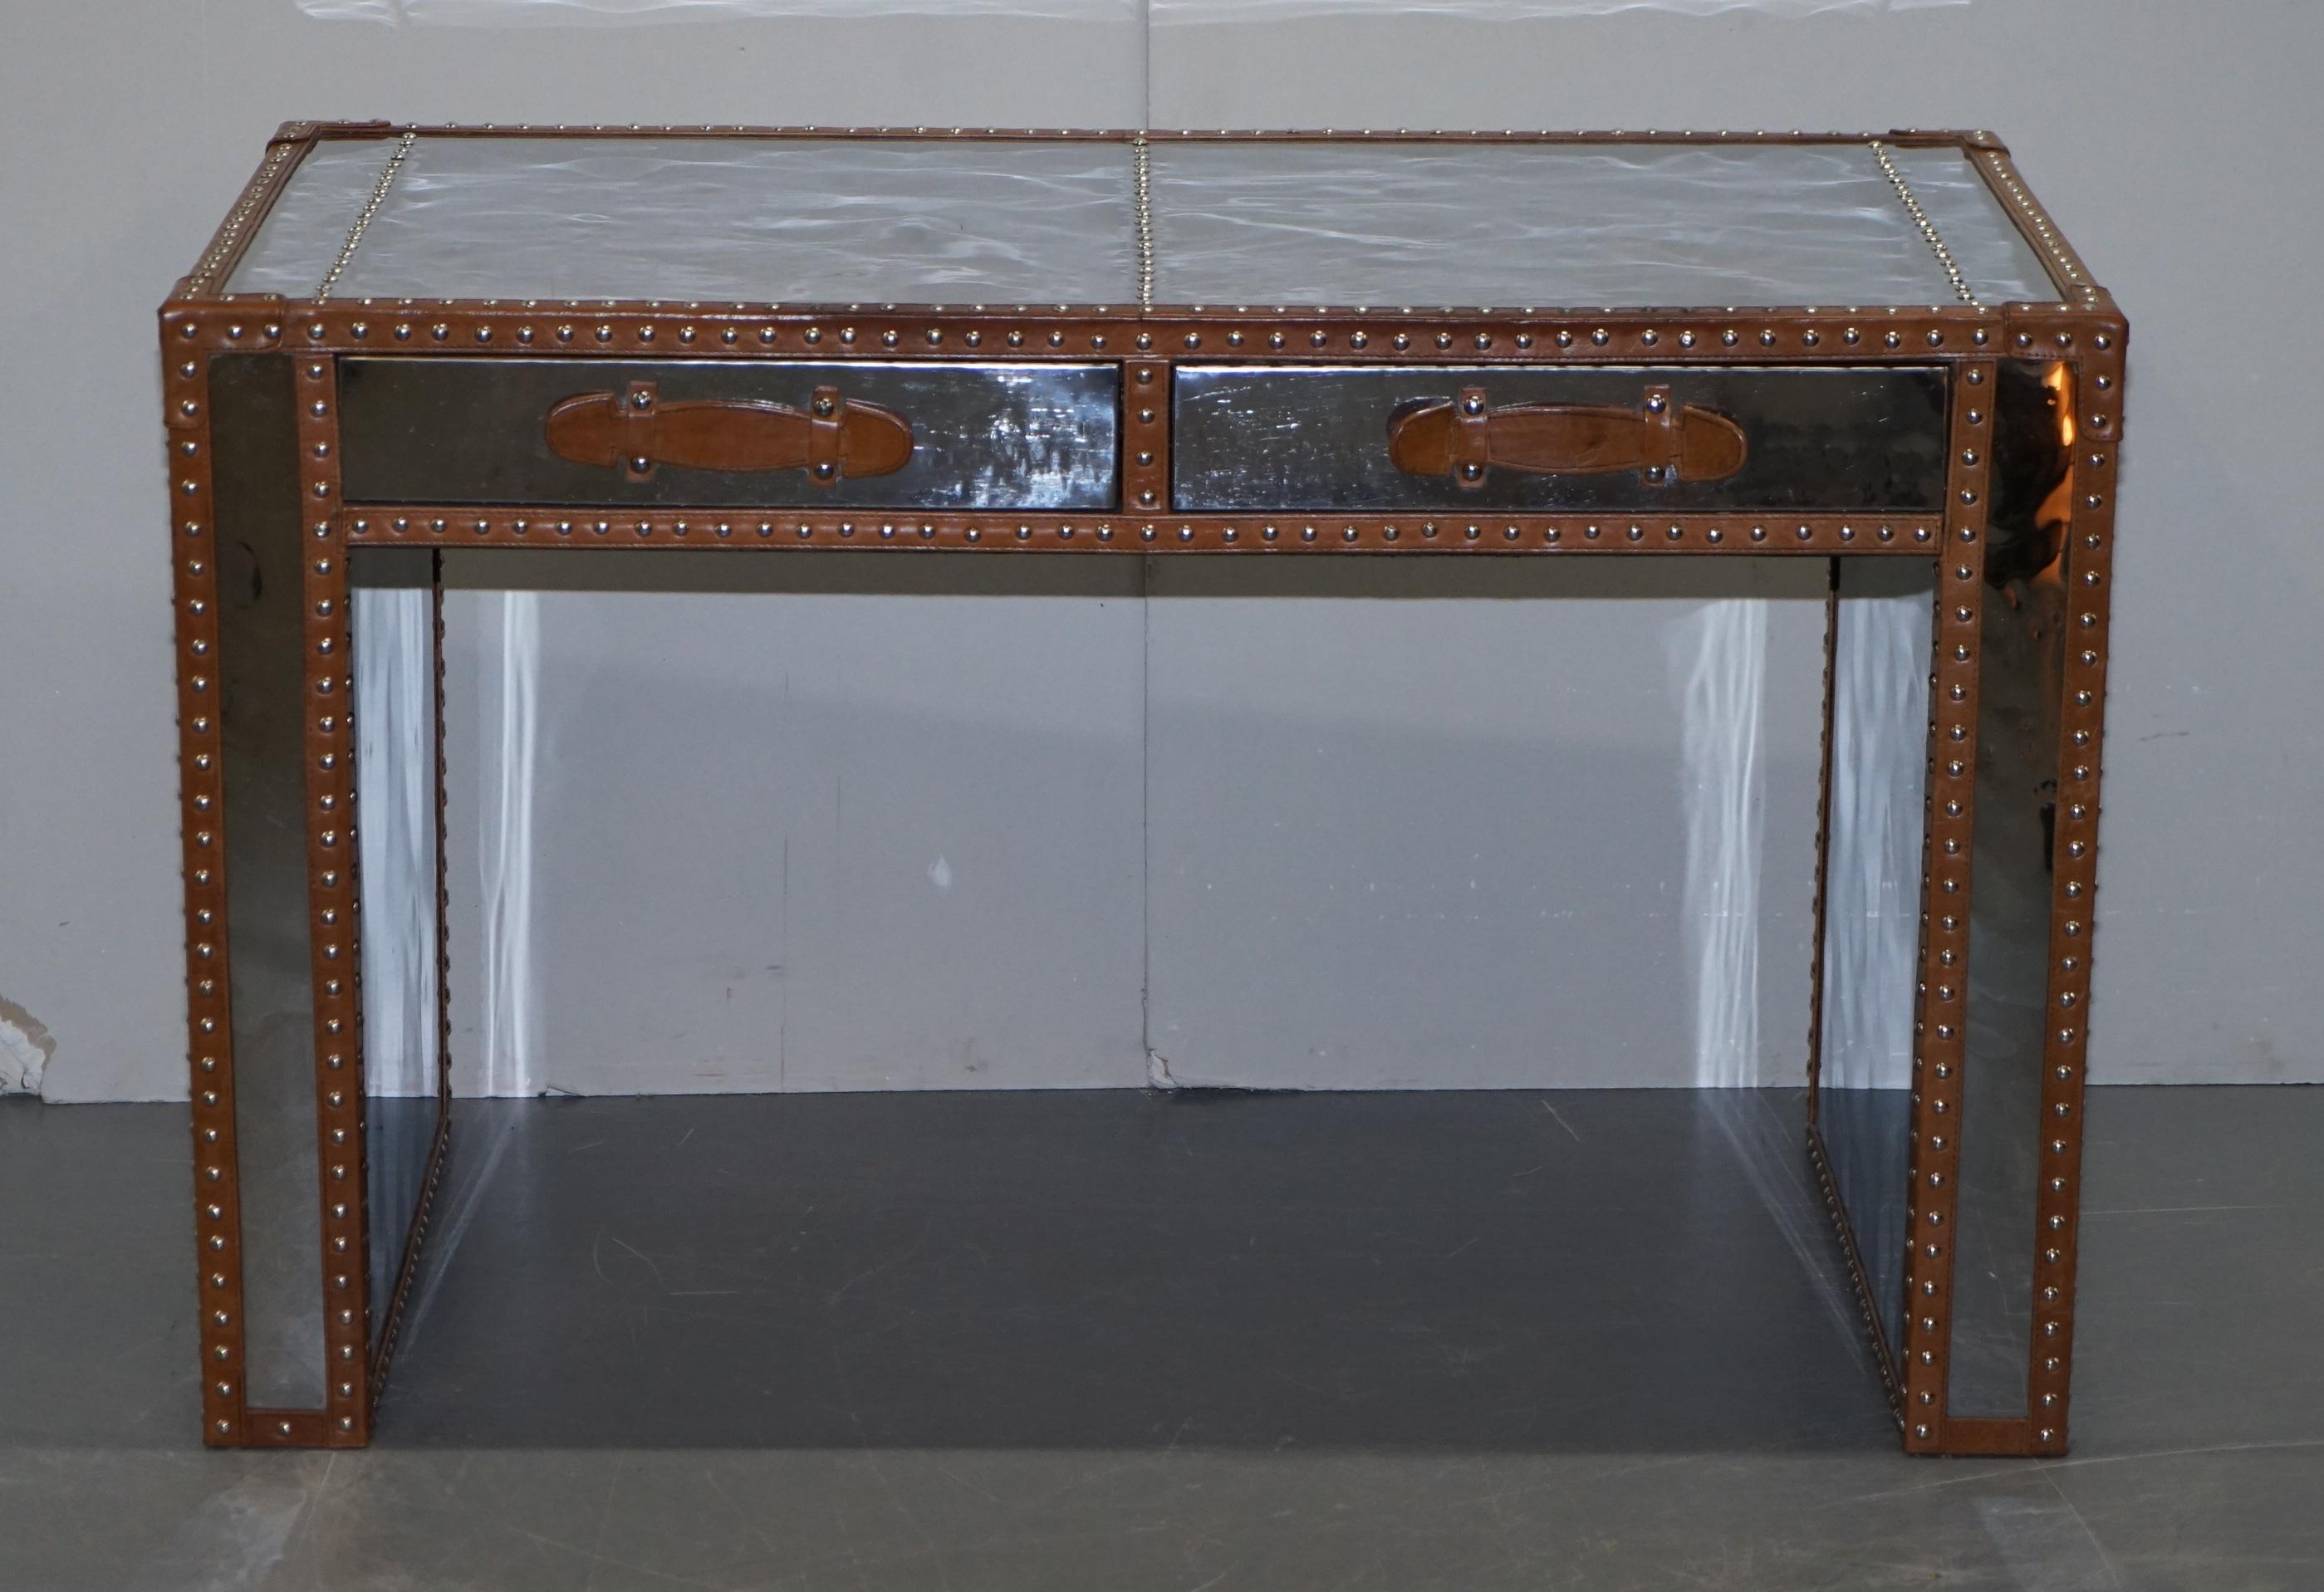 We are delighted to offer for sale this lovely Andrew Martin chrome and leather luggage Military Campaign style desk

A very good looking well made and decorative writing table. The frame is polished chrome and has a mirror finish as do all the